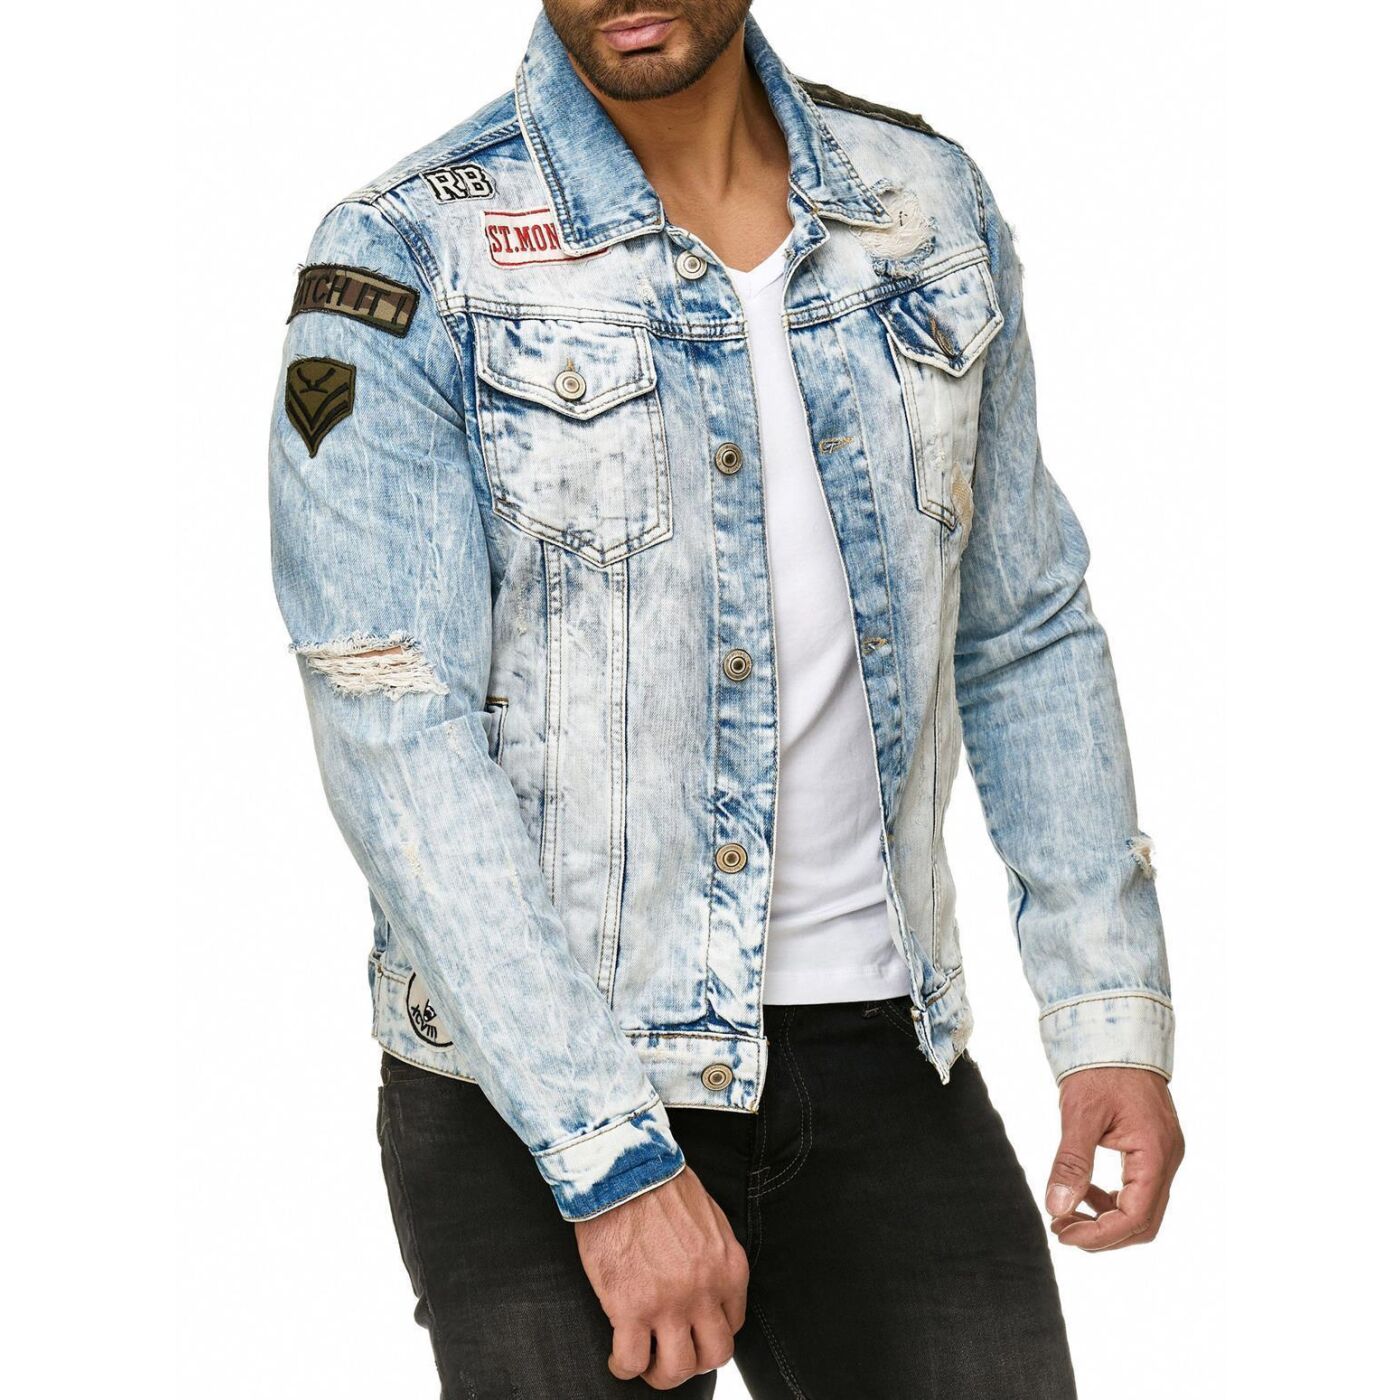 jean jacket with collared shirt